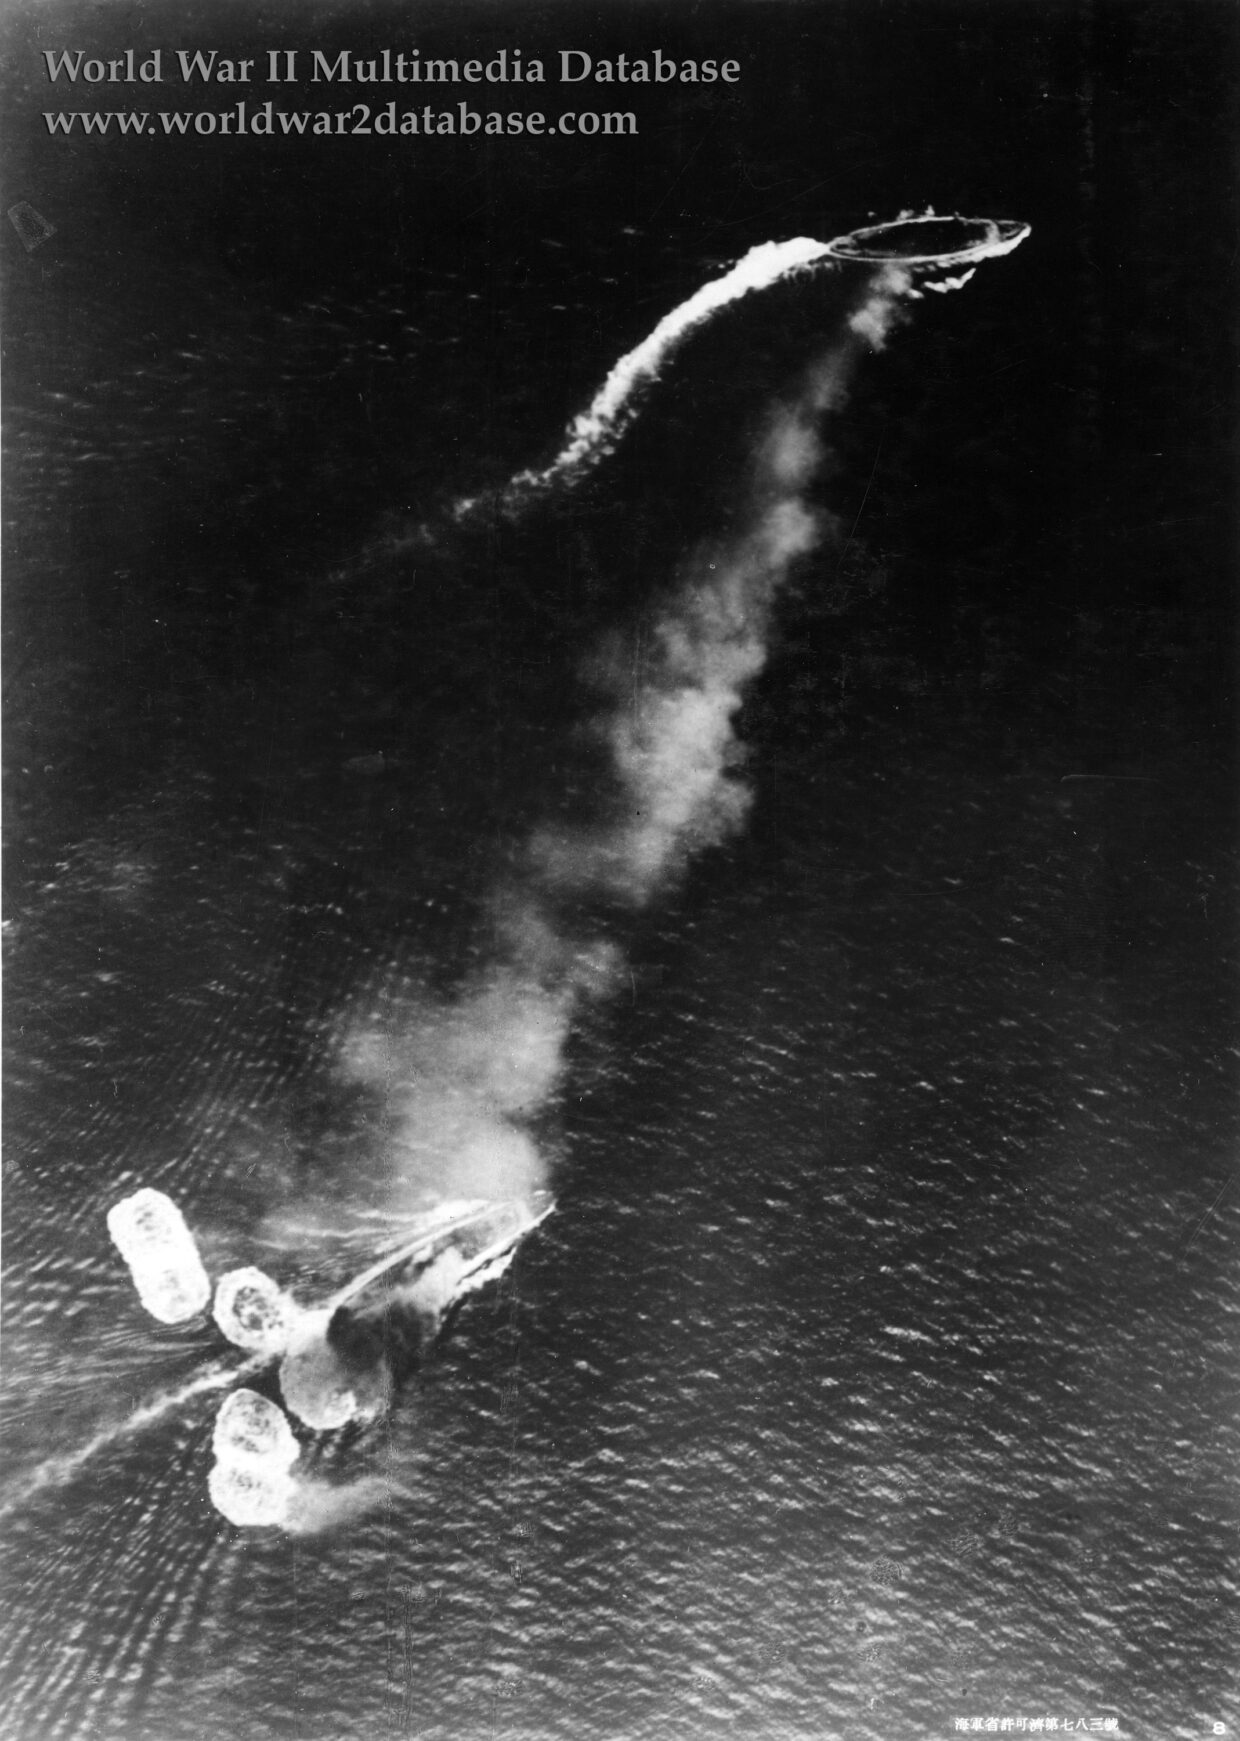 HMS Repulse and HMS Prince of Wales Under High-Level Japanese Air Attack